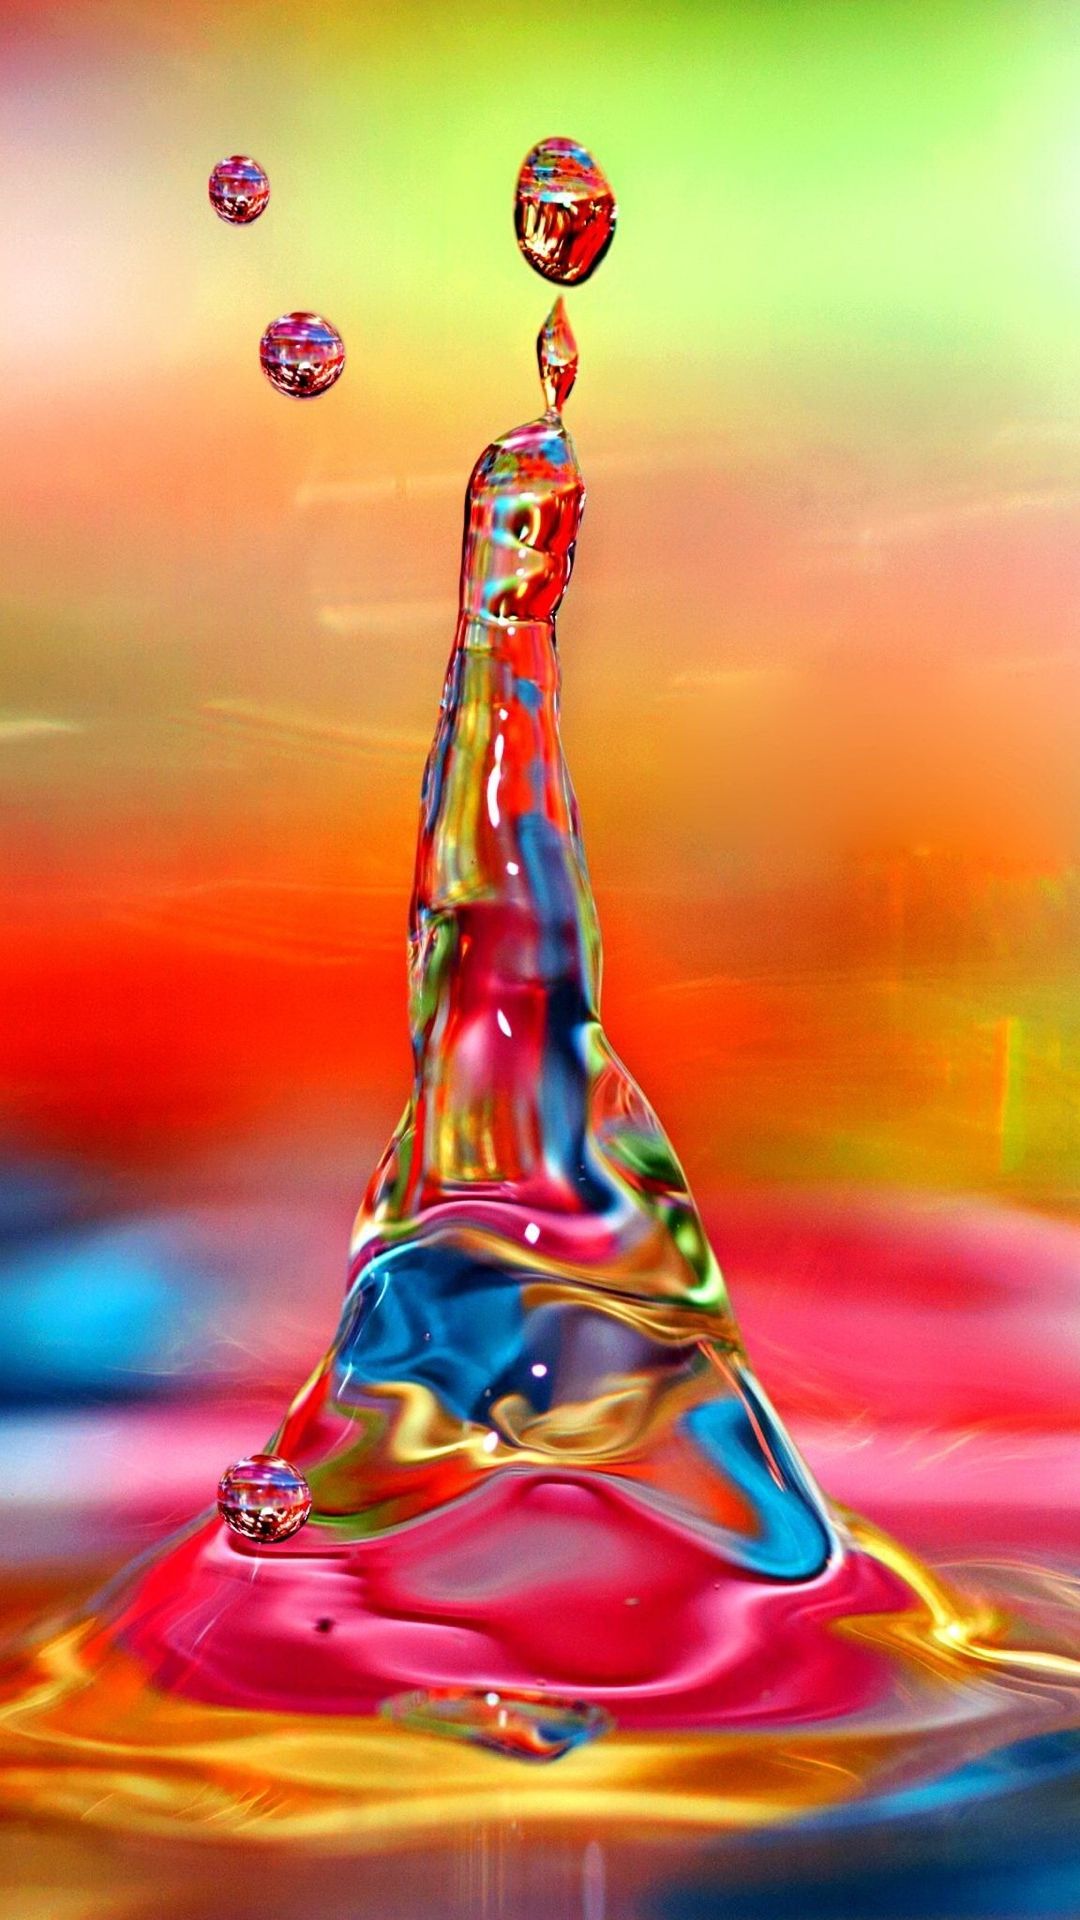 Colorful Water Drop Android Wallpaper free download